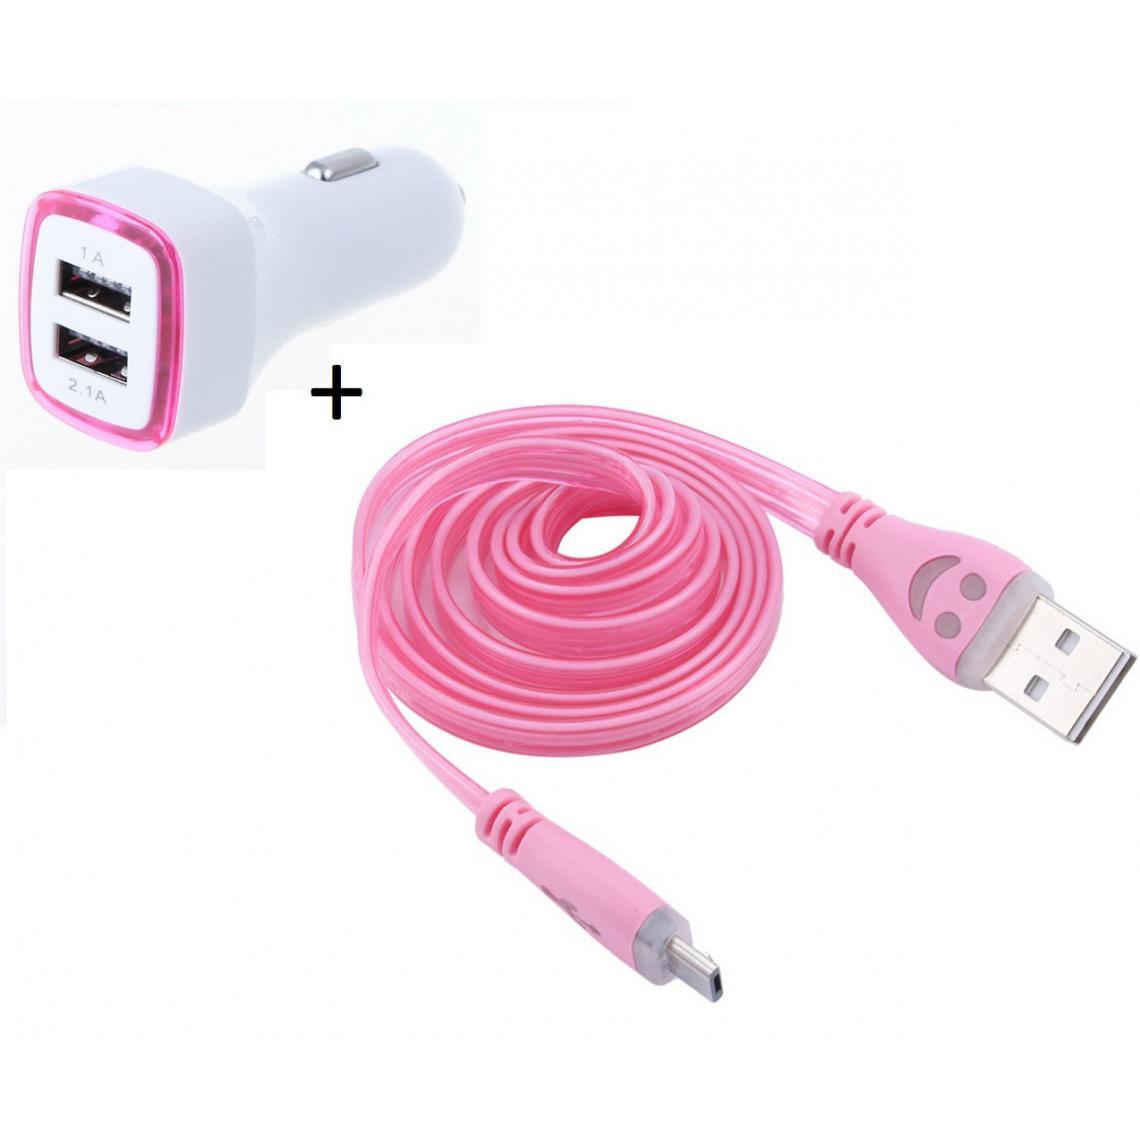 Shot - Pack Chargeur Voiture pour "IPHONE 12 Pro Max" Lightning (Cable Smiley + Double Adaptateur LED Allume Cigare) (ROSE) - Chargeur Voiture 12V